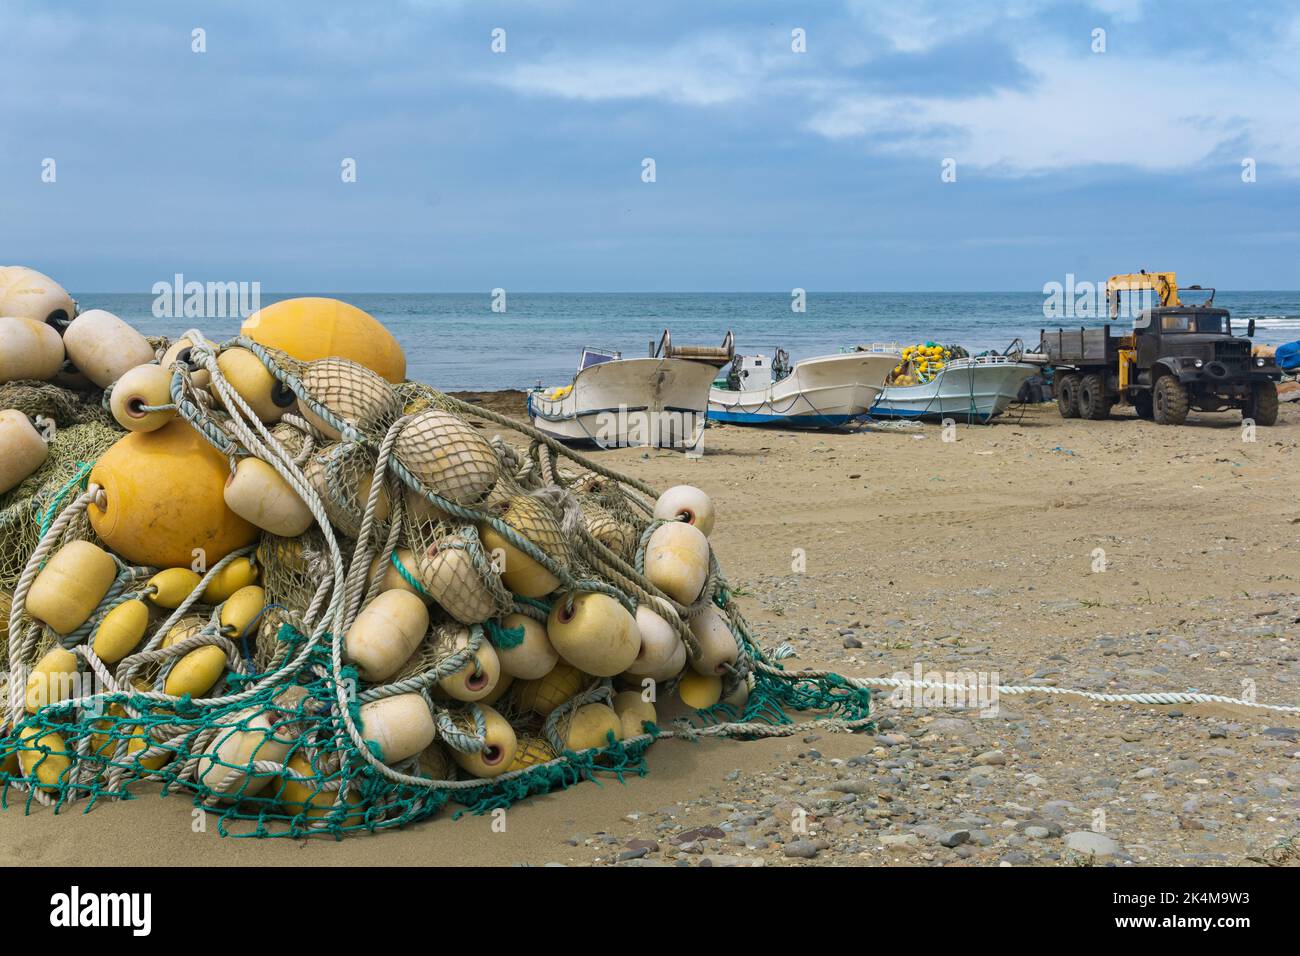 industrial fishing net with bright floats is folded on the seashore against the backdrop of fishing boats and truck crane for catch Stock Photo